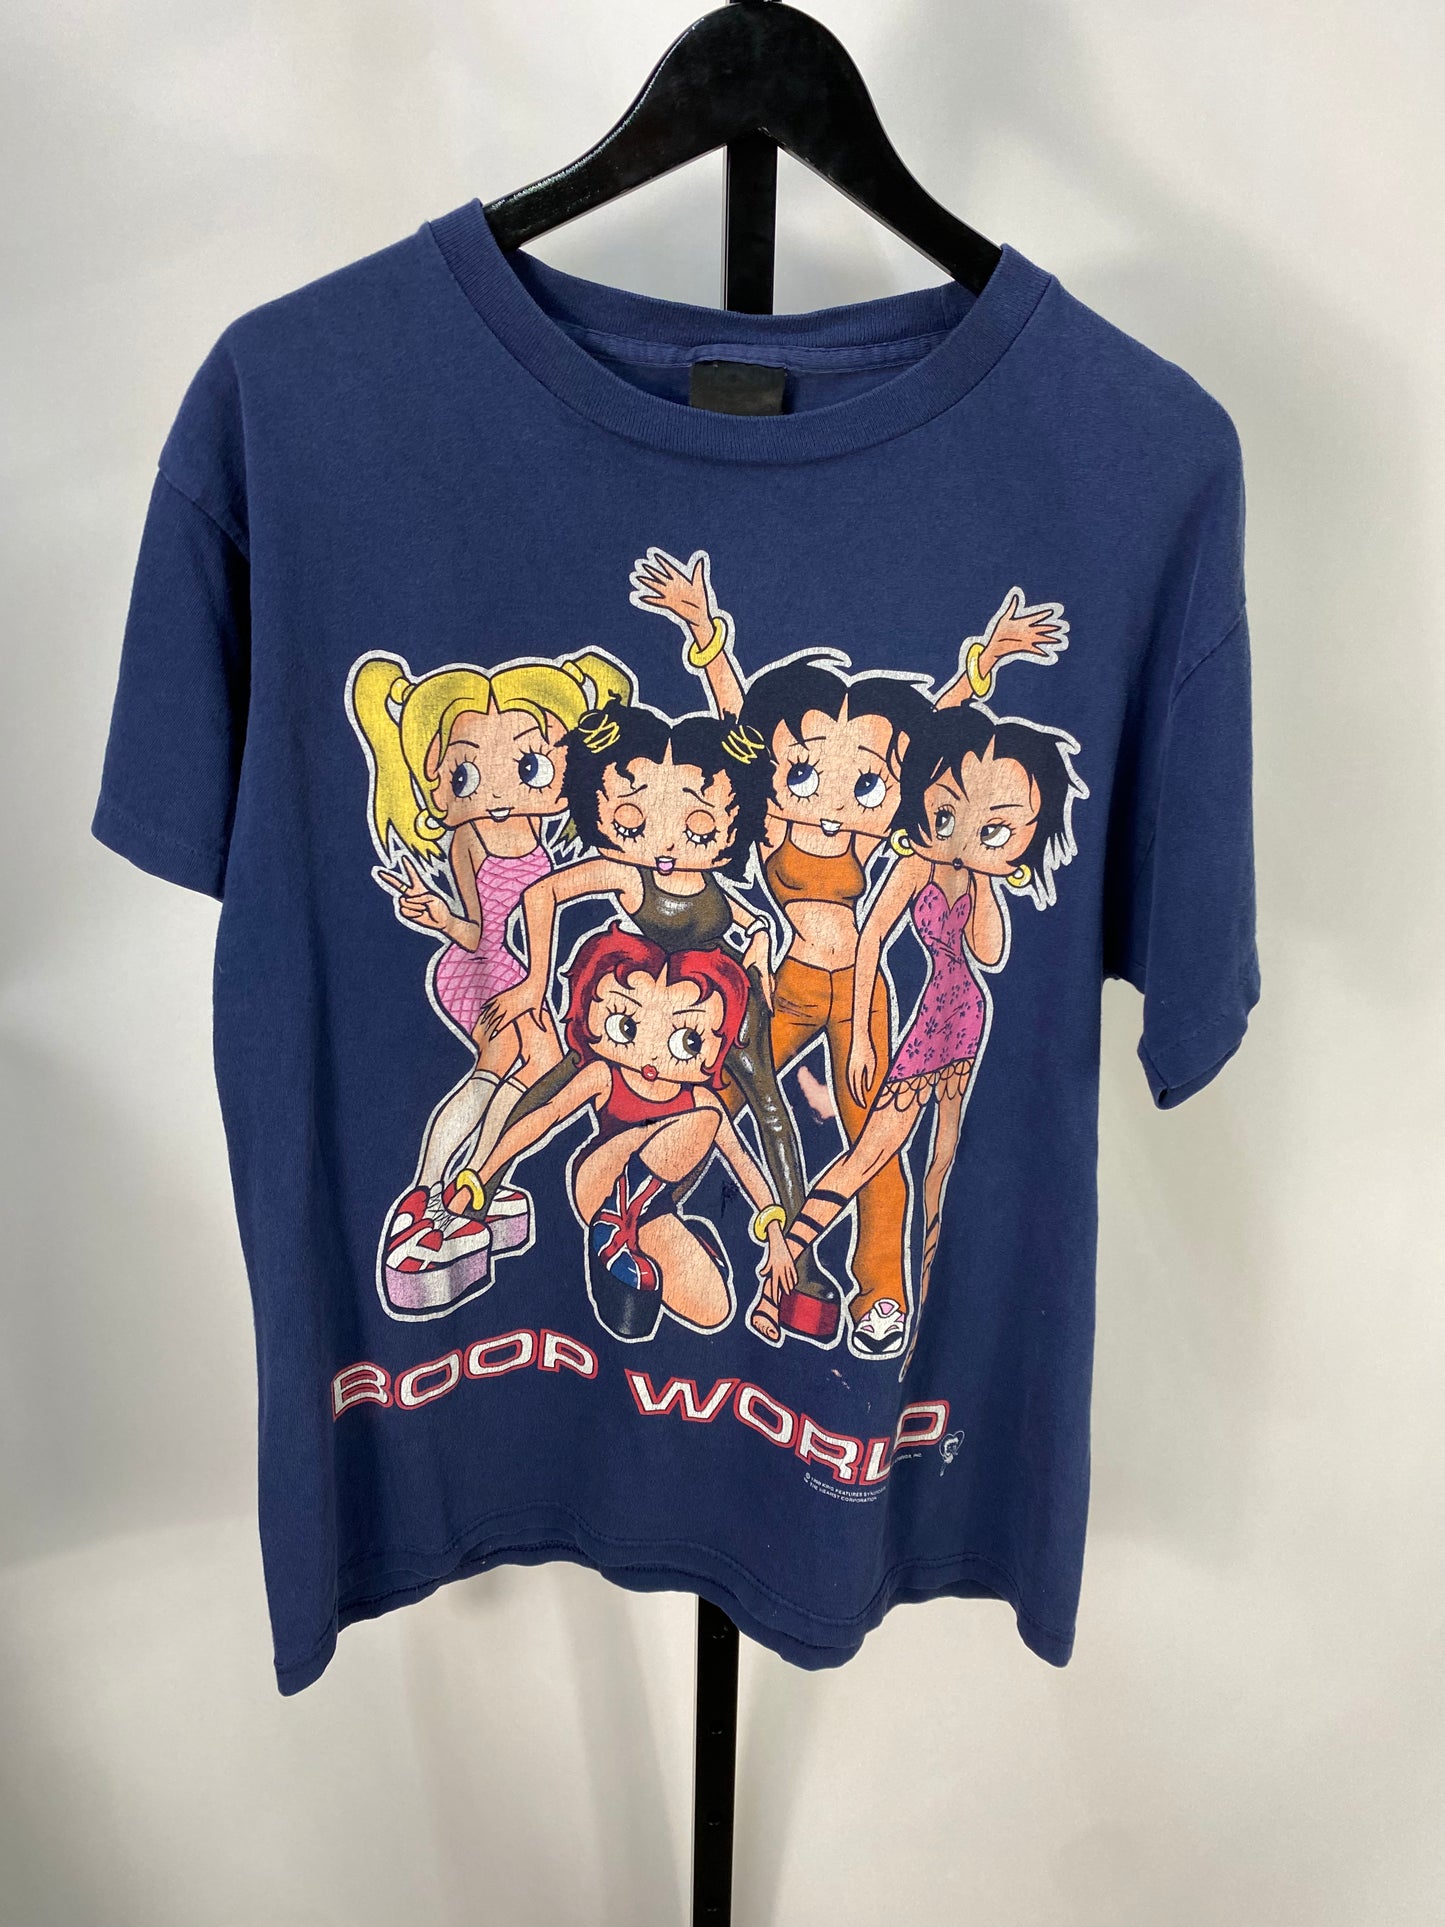 Load image into Gallery viewer, VTG Betty Boop Spice Worlds Graphic Tee Sz Med
